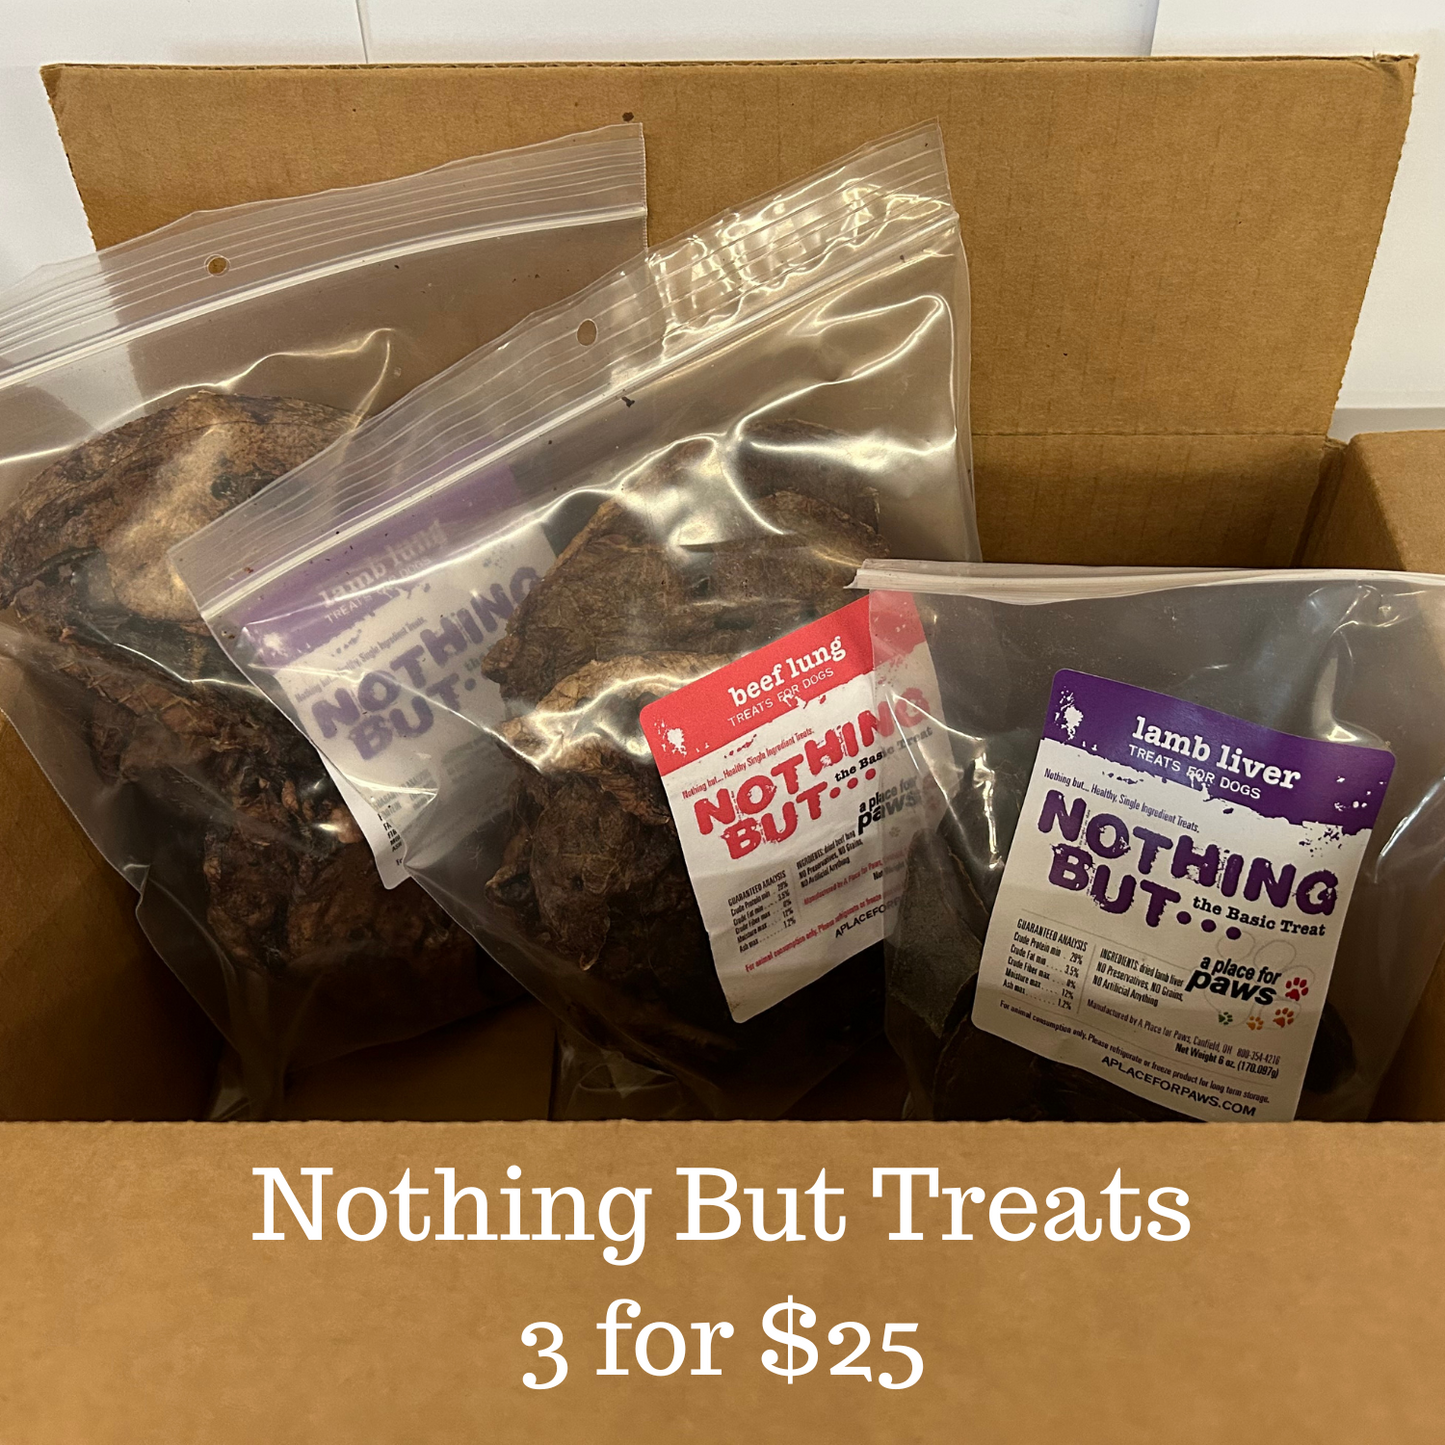 Nothing But Treats ... 3 for $25